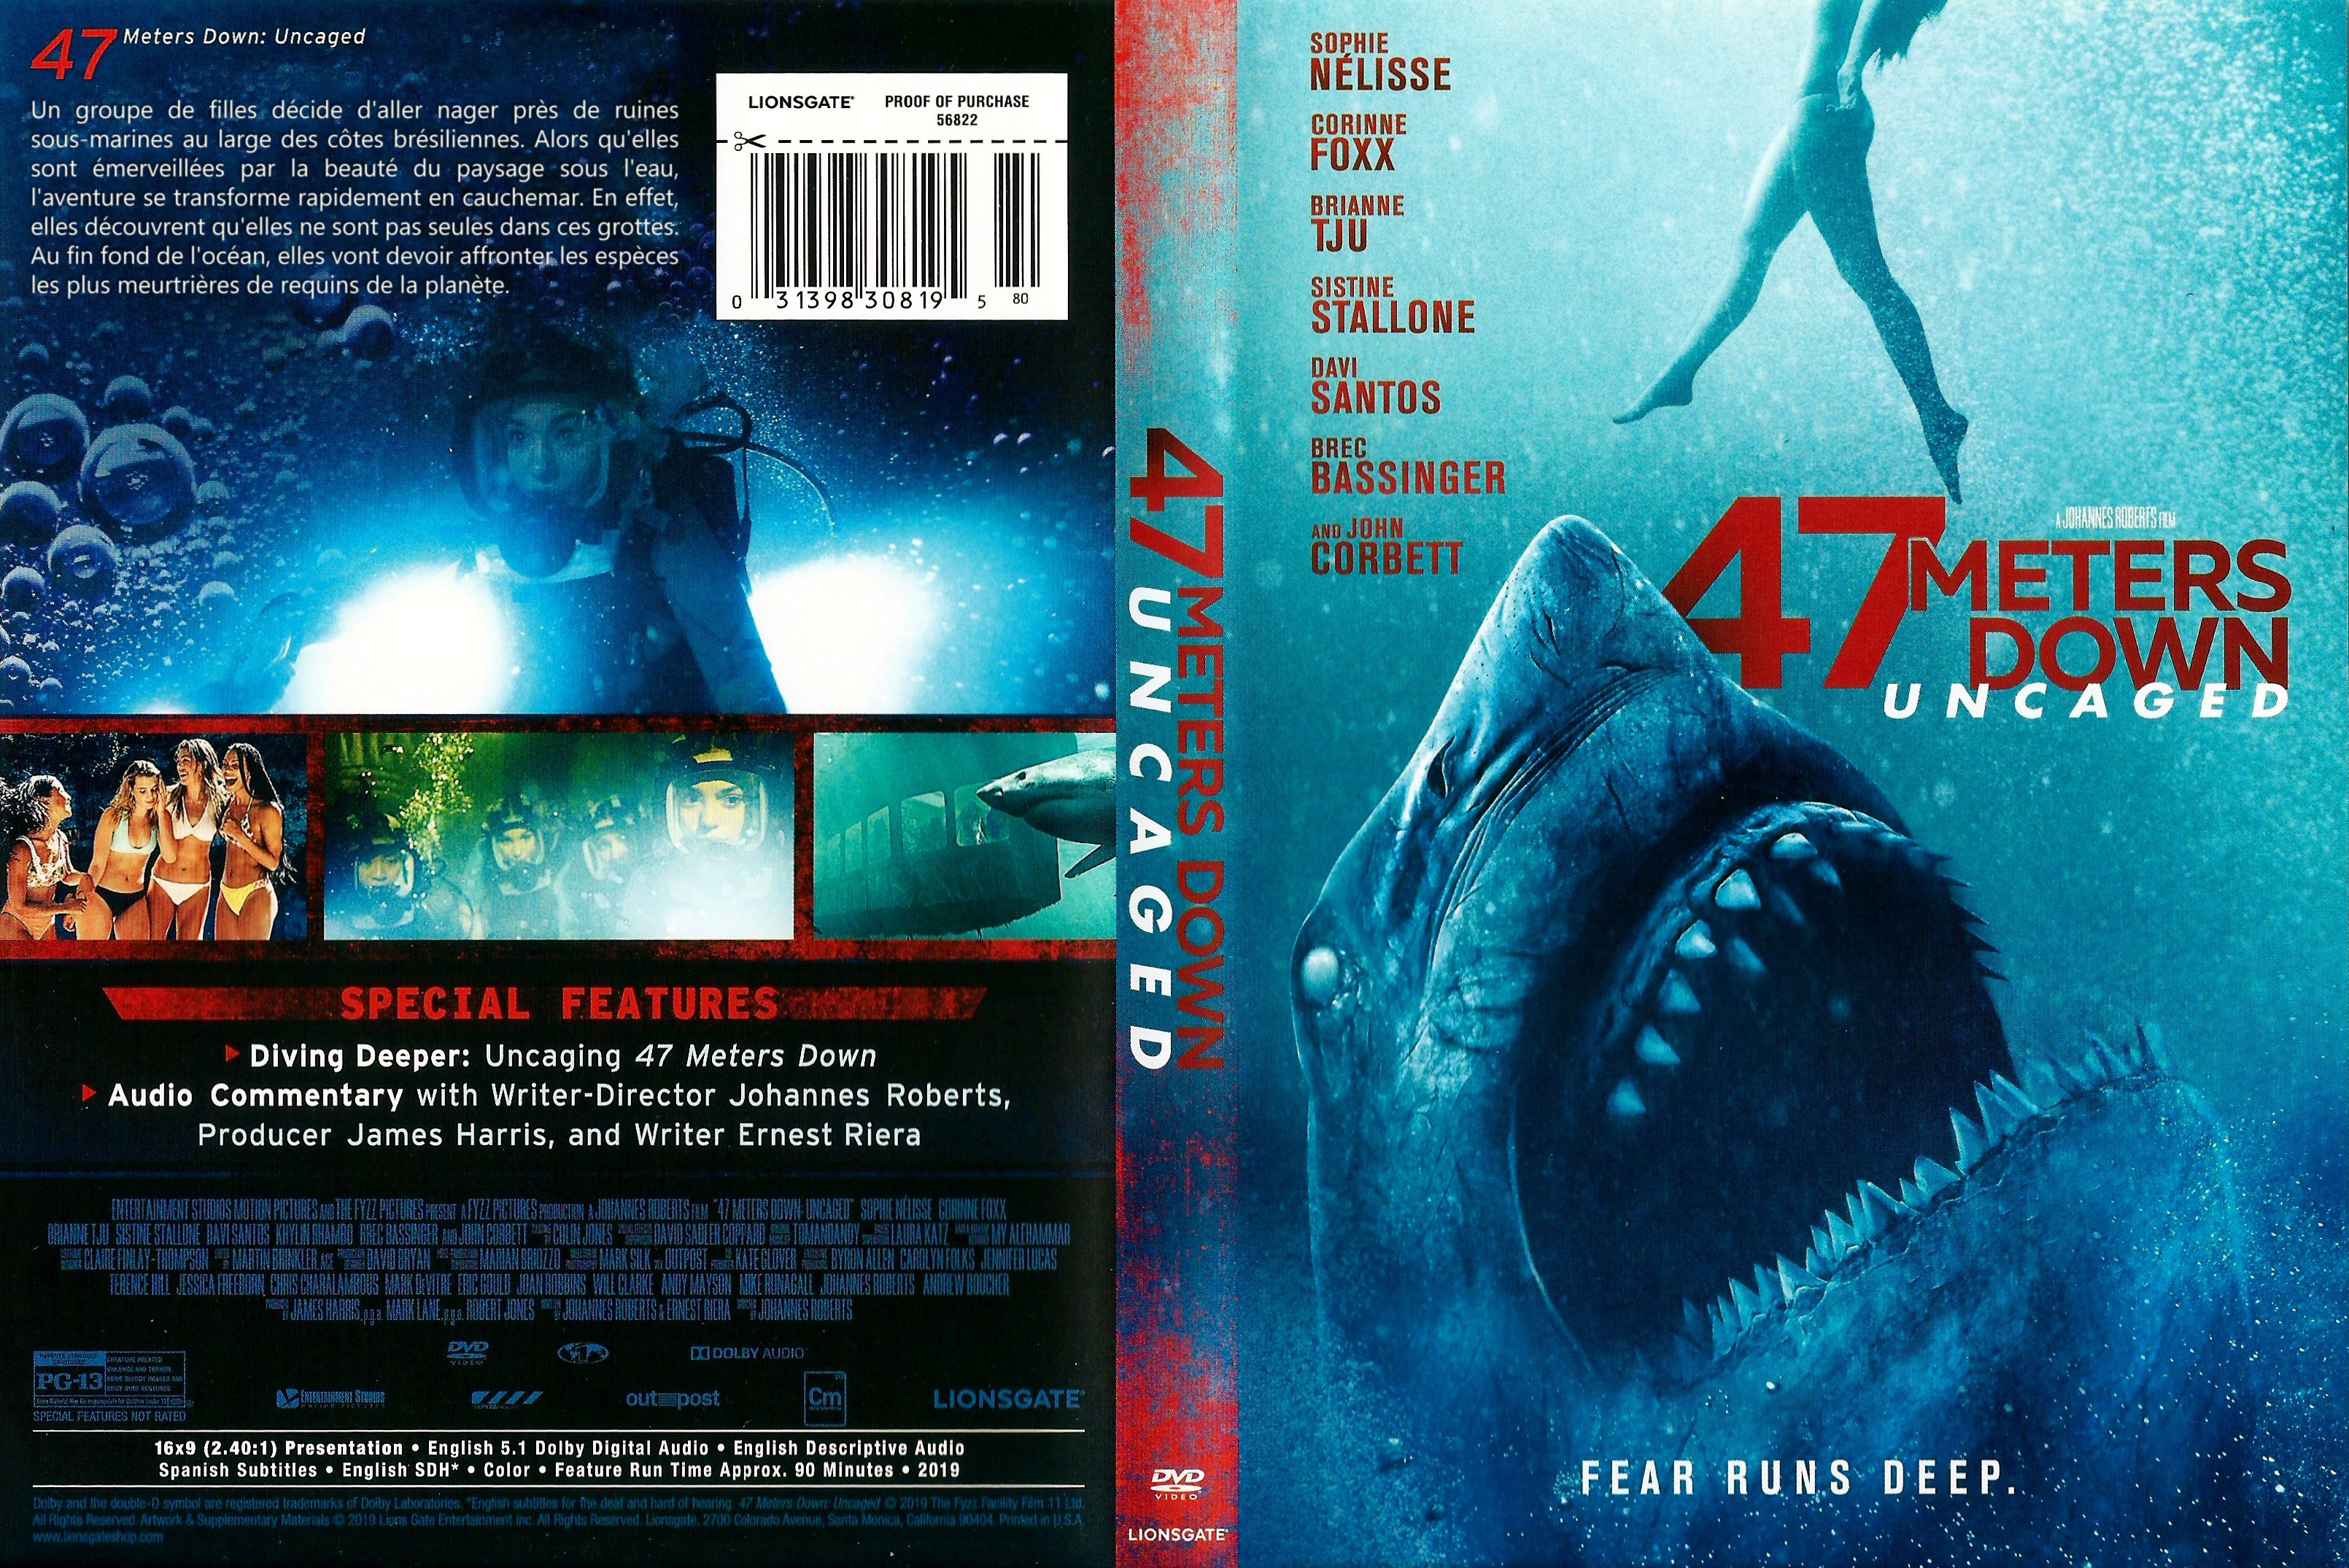 Jaquette DVD 47 Meters Down 2 Uncaged